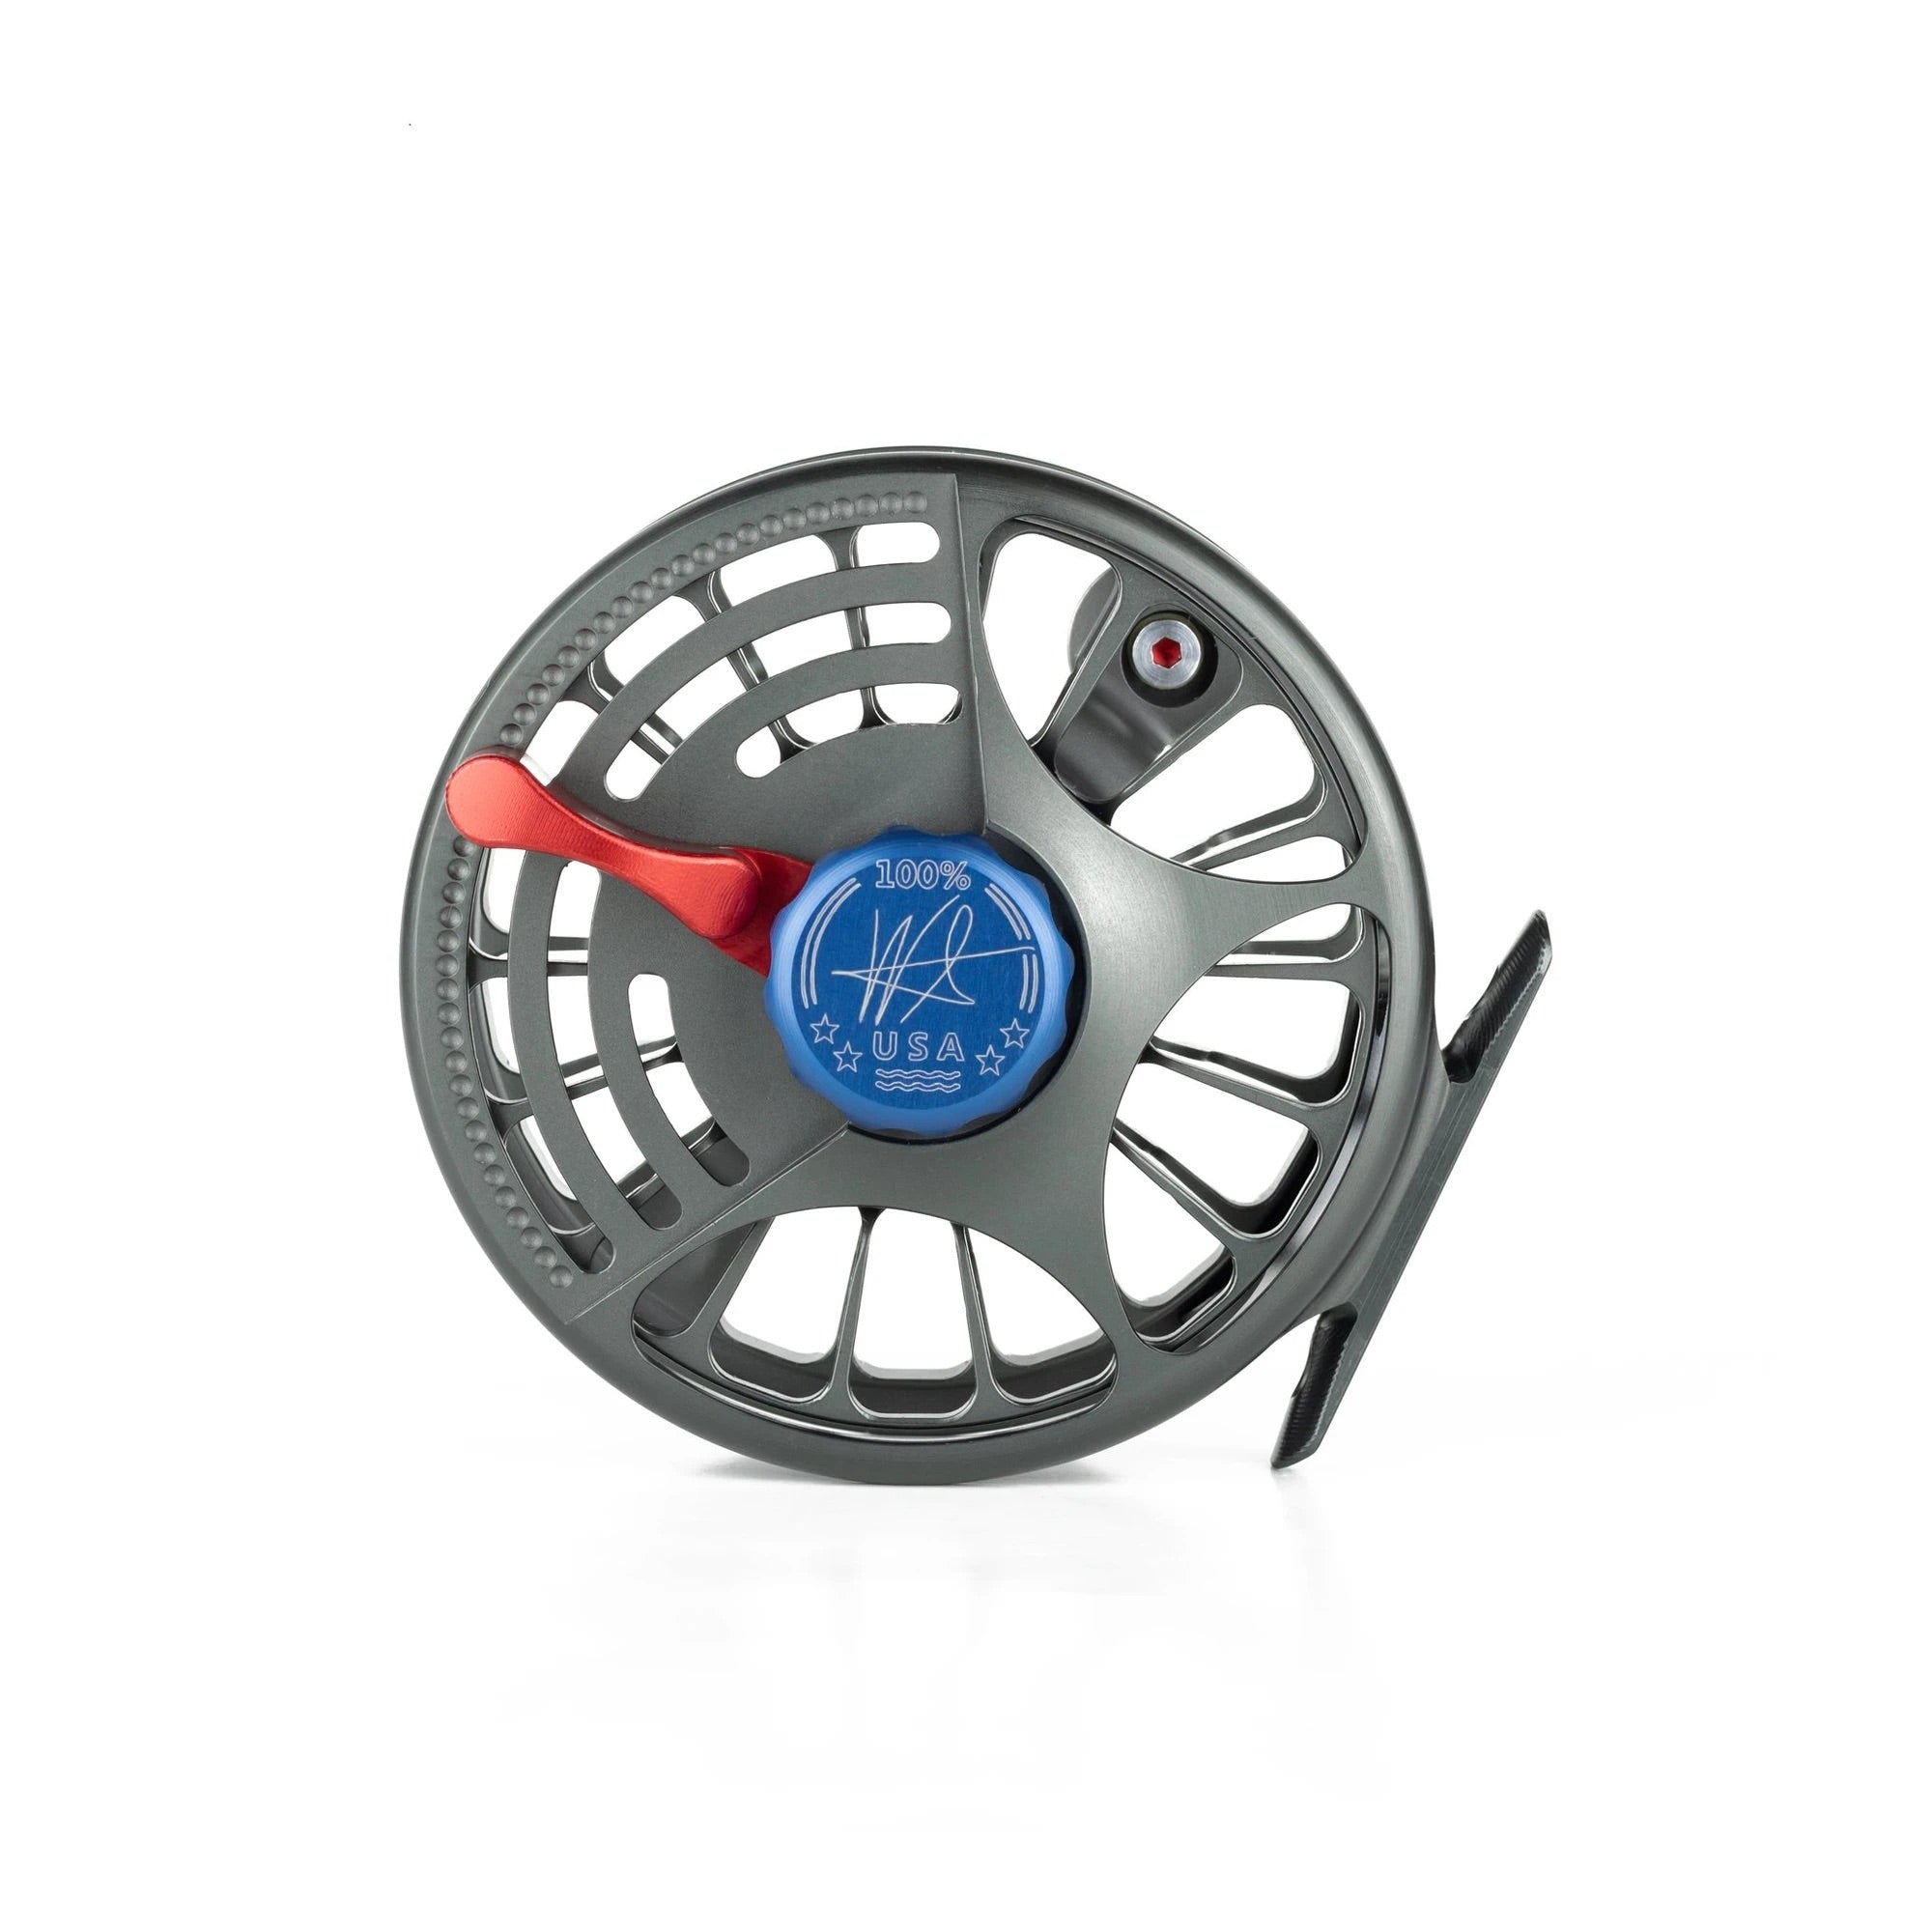 Seigler Reels SF Small Fly Reel with Lever Drag